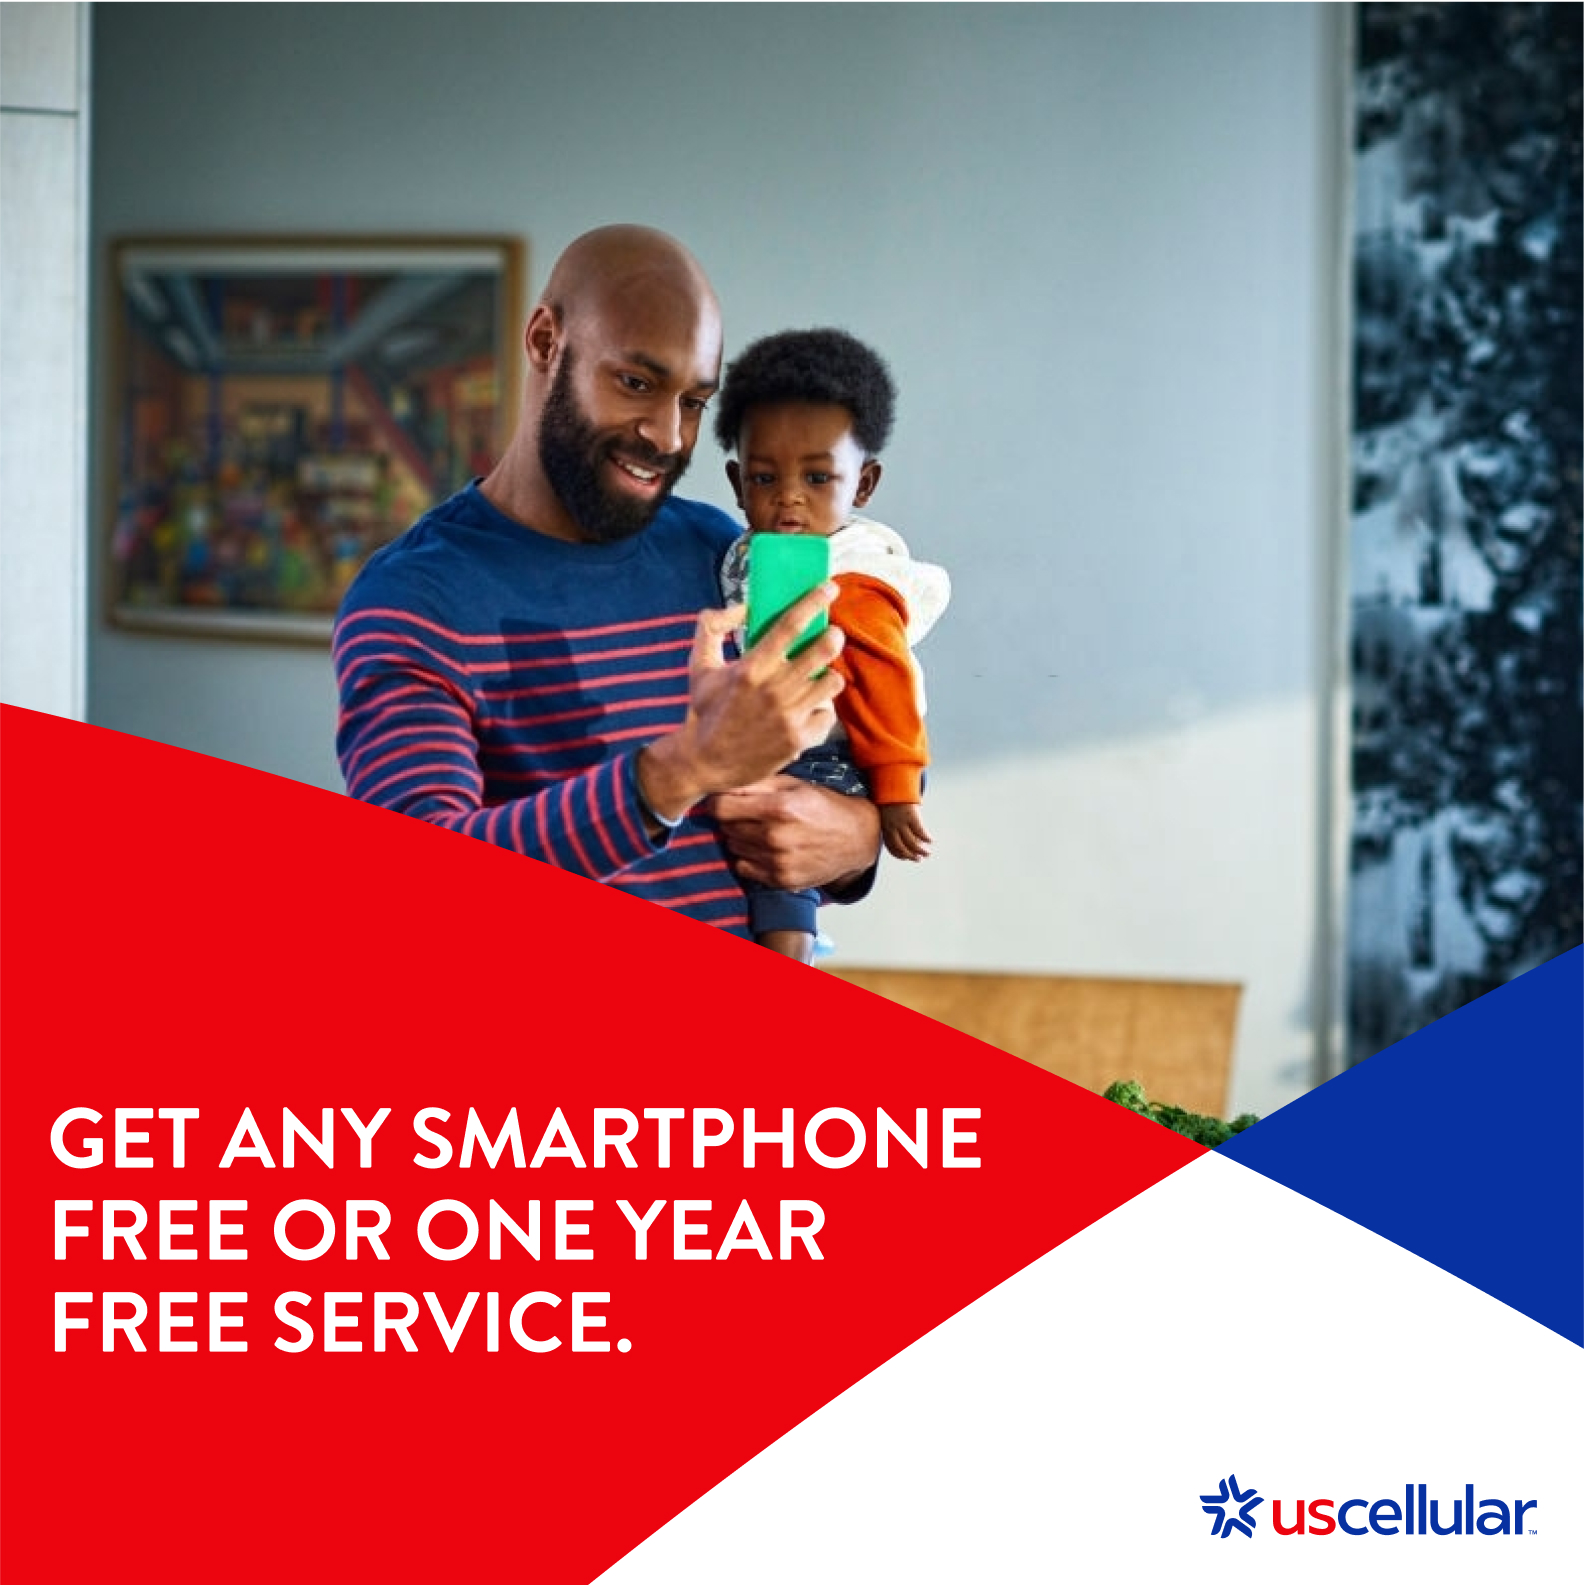 November 2021 – Choose any phone ANY brand FREE plus Unlimited Data $30/mo. with 4 lines or One year of free service – 11/11/2021 - 03/31/22